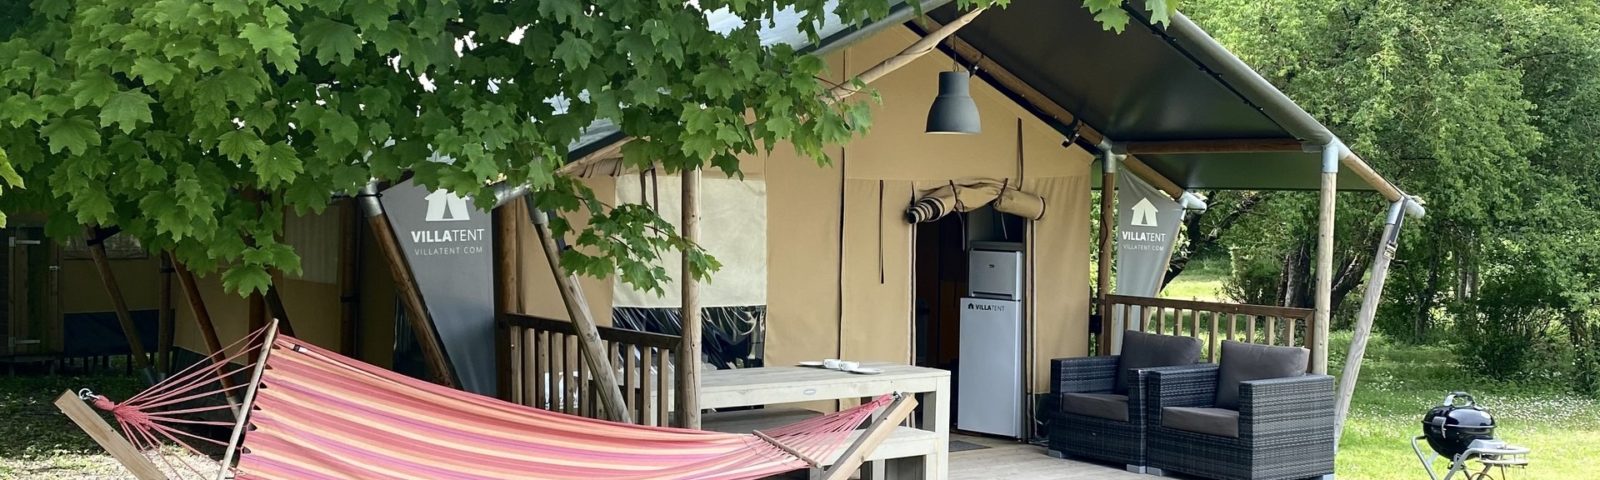 Glamping holidays in France